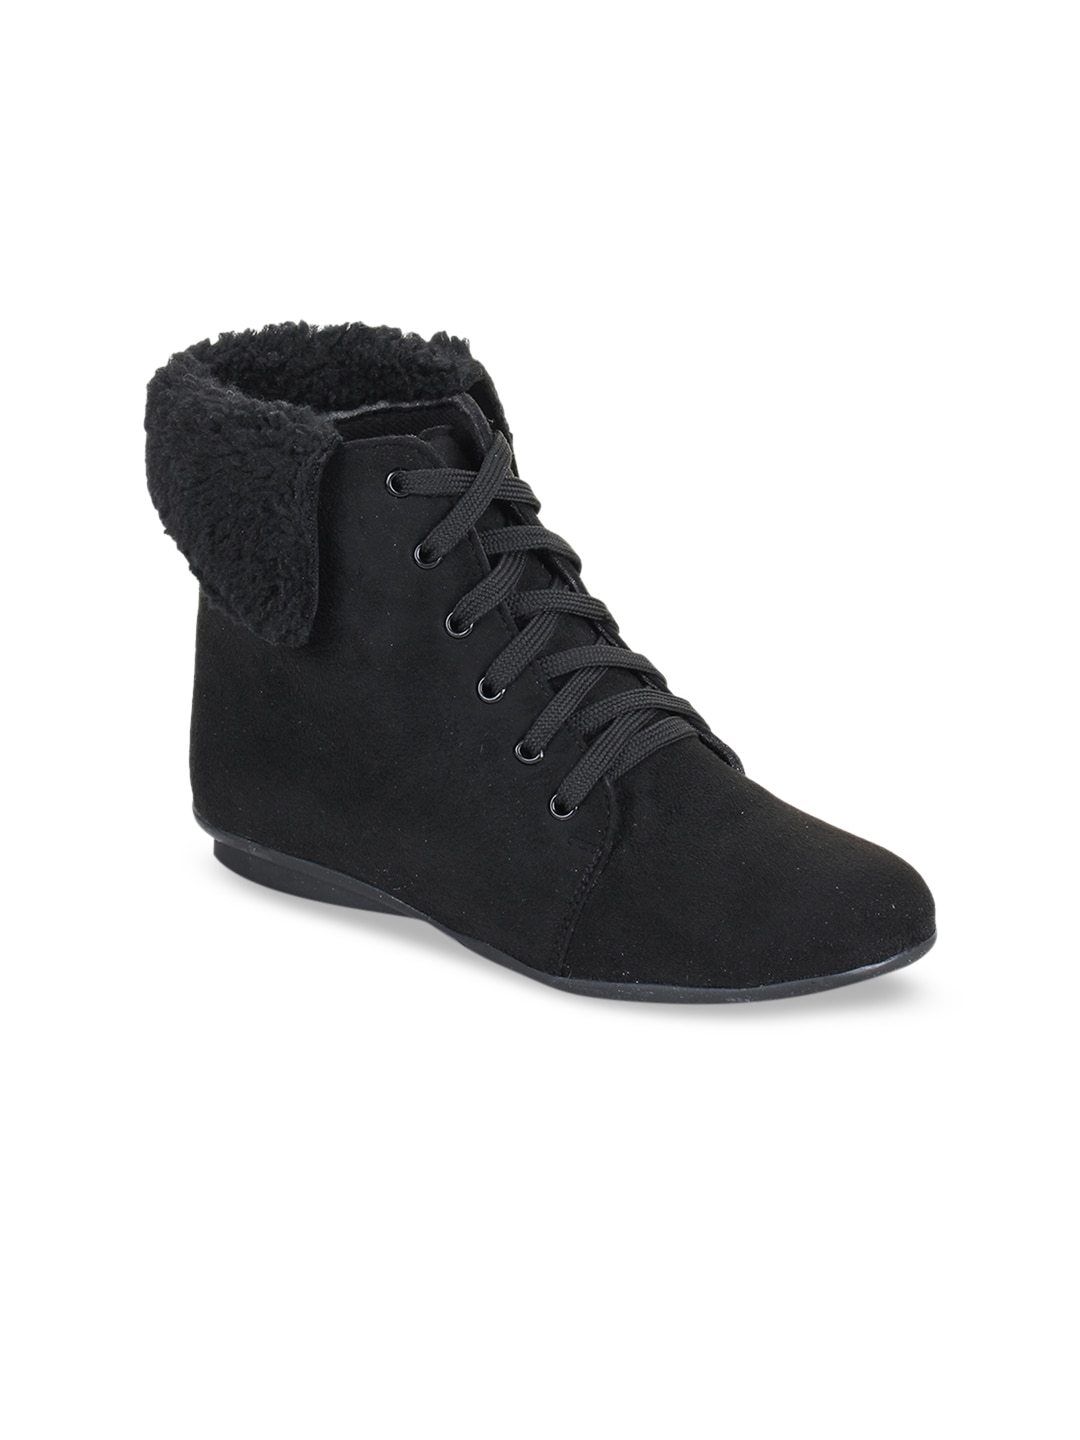 Bruno Manetti Women Black Solid Synthetic High-Top Flat Boots Price in India